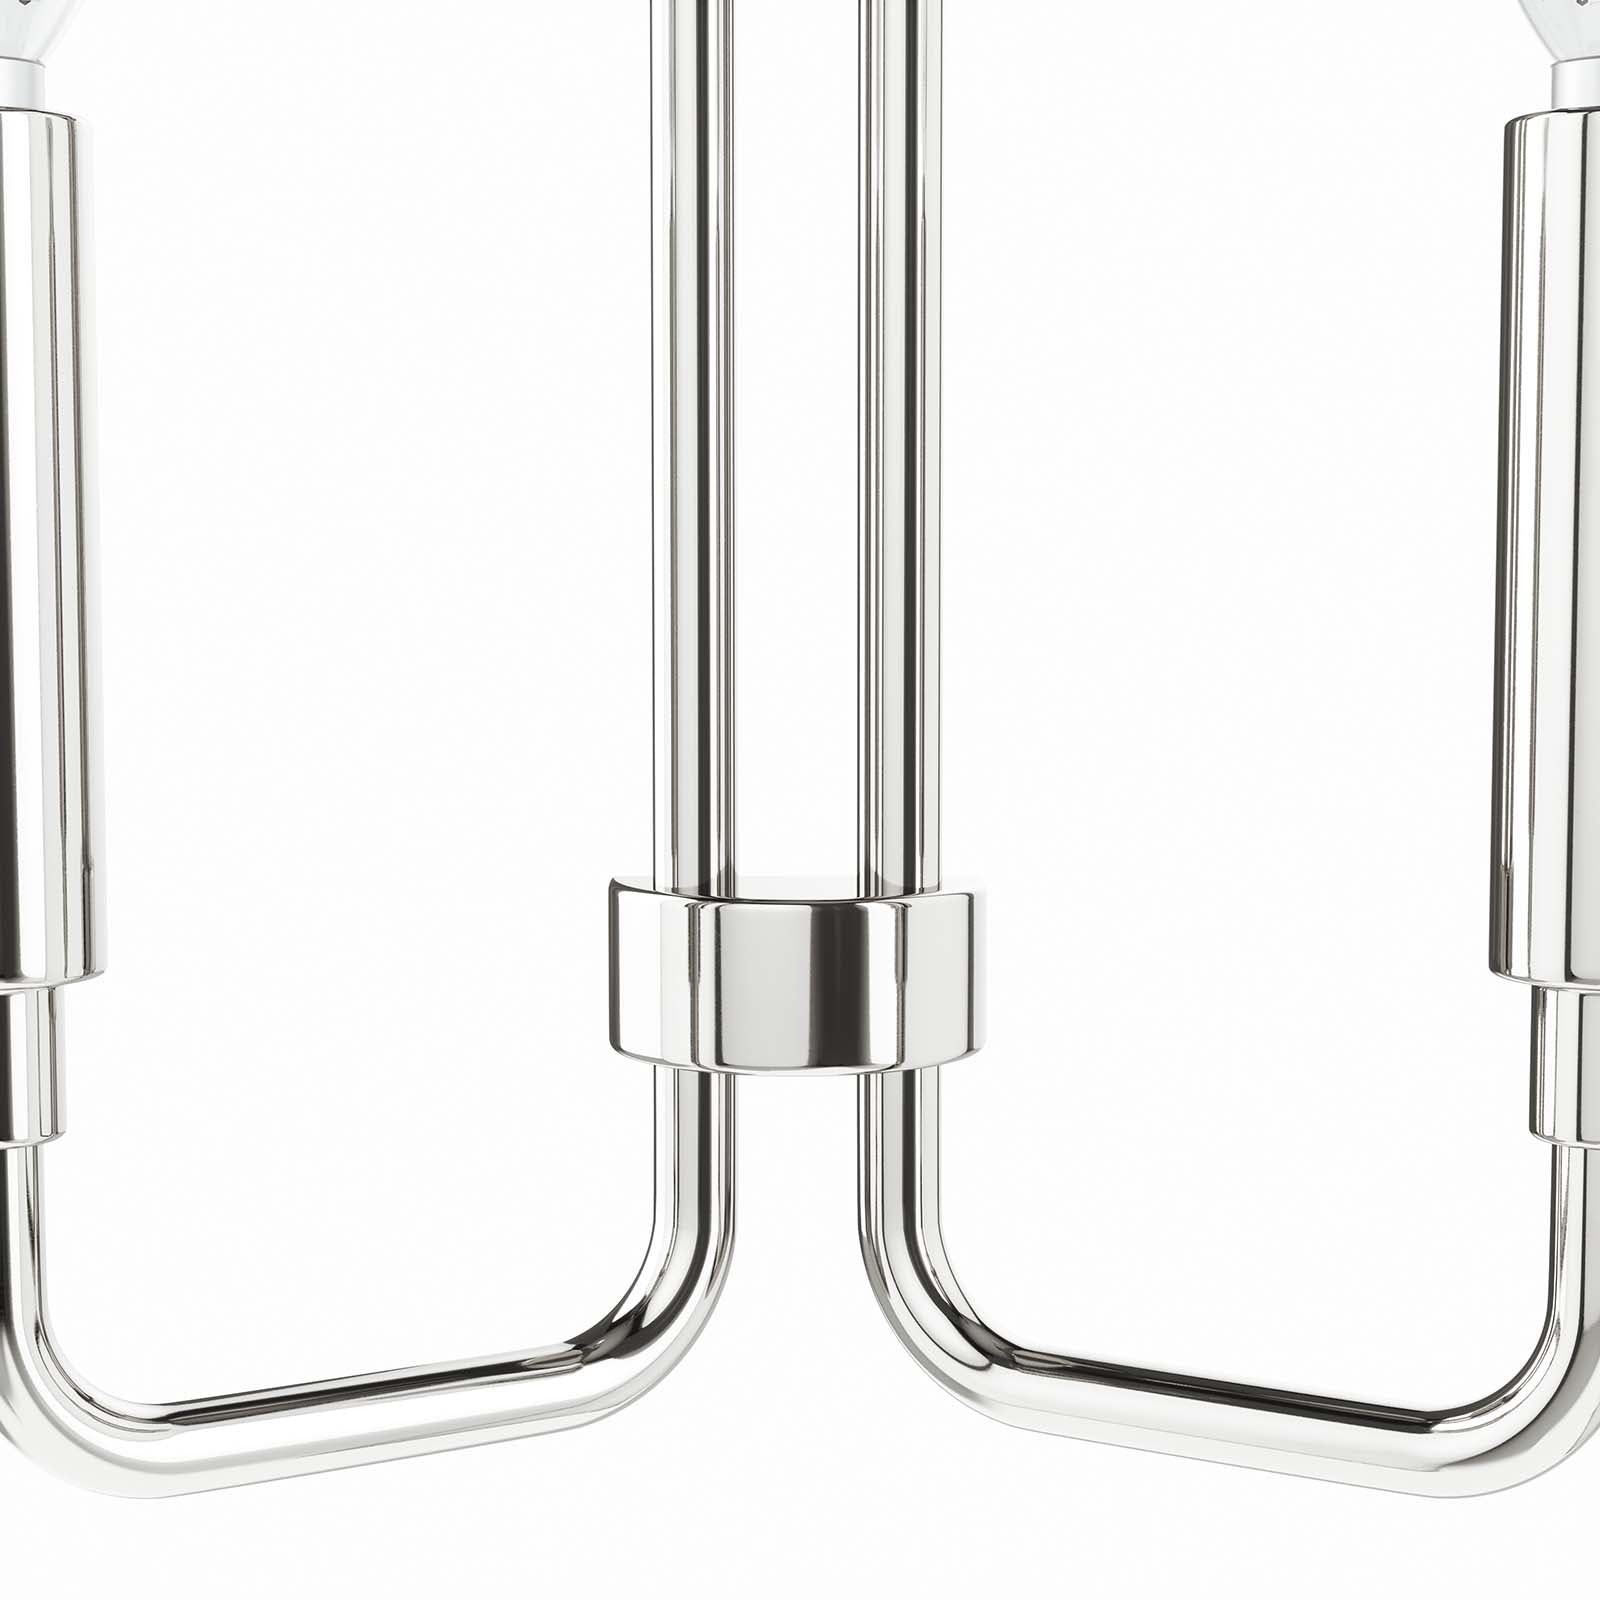 Modway Wall Sconces - Rekindle 2-Light Wall Sconce Polished Nickel